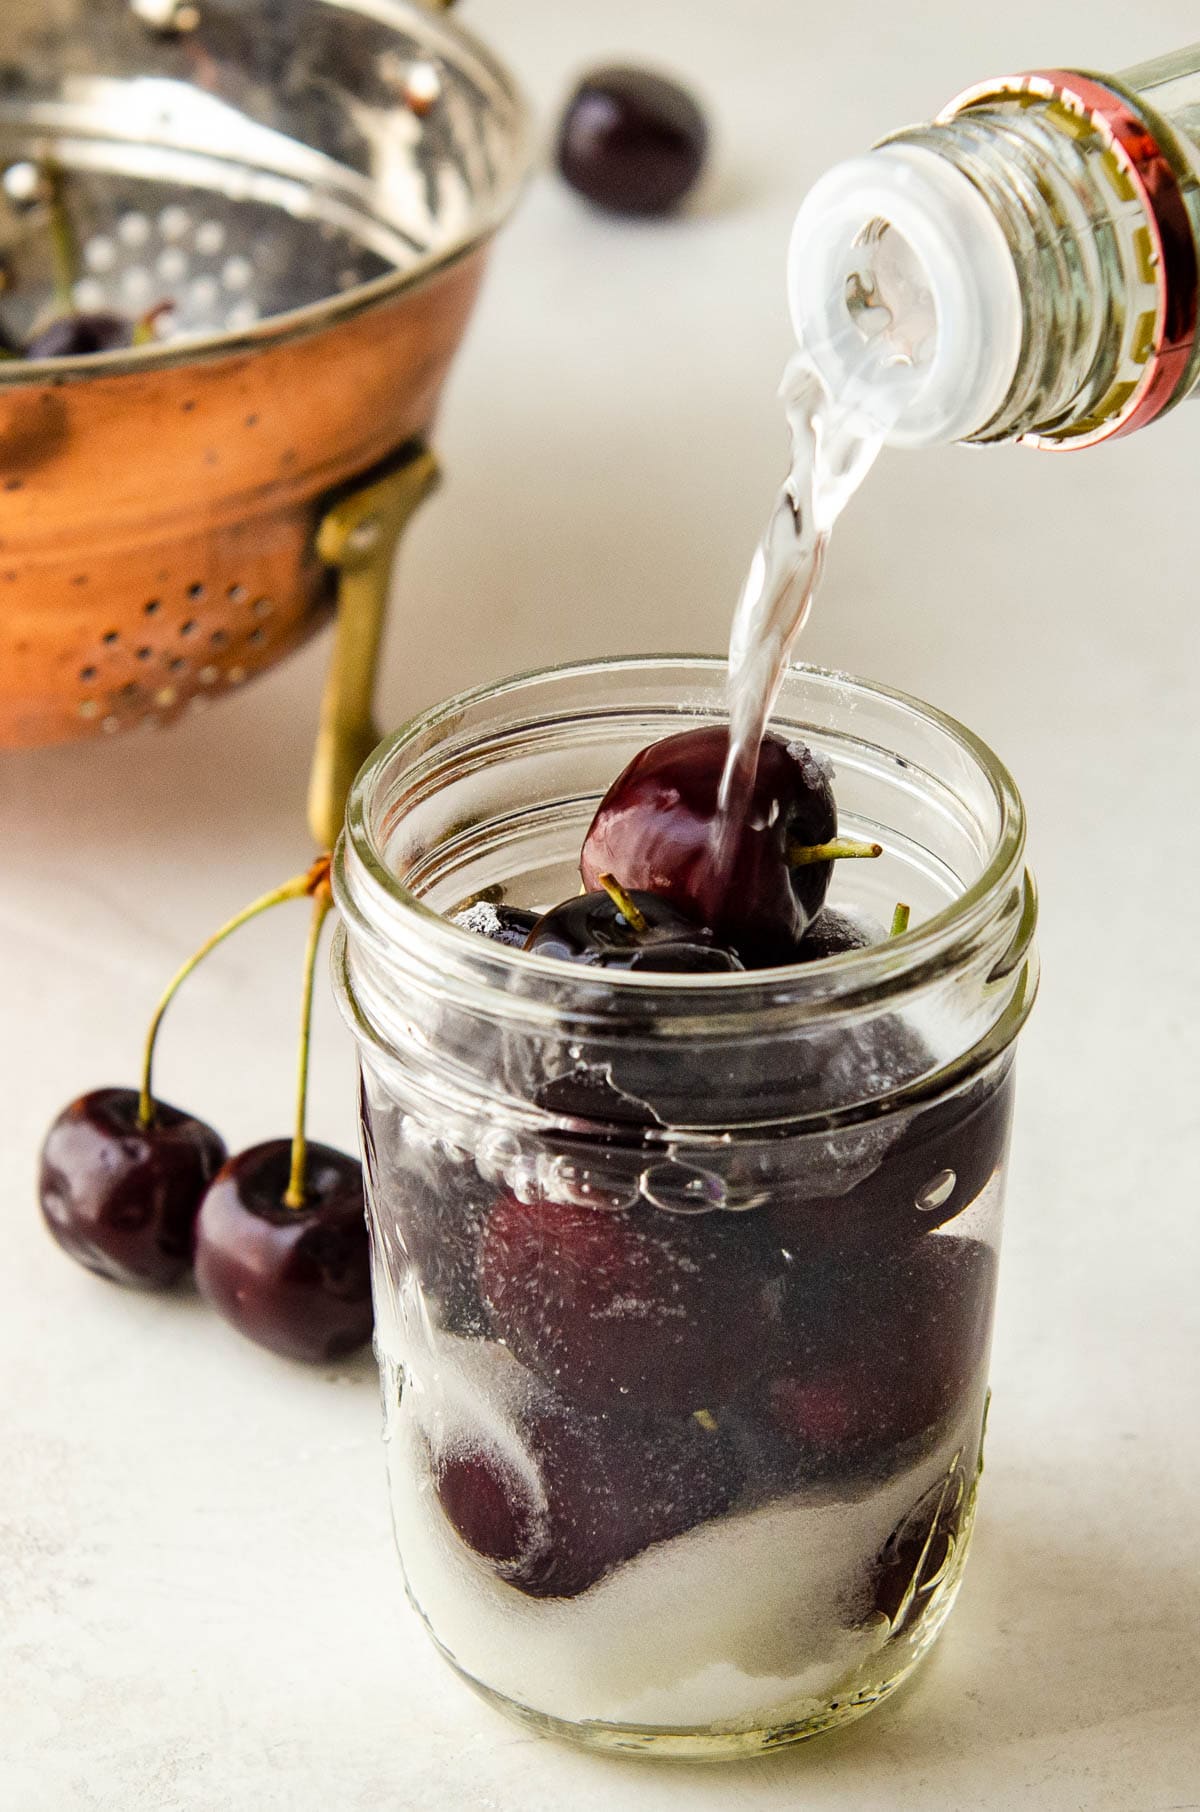 pouring vodka over the cherries.